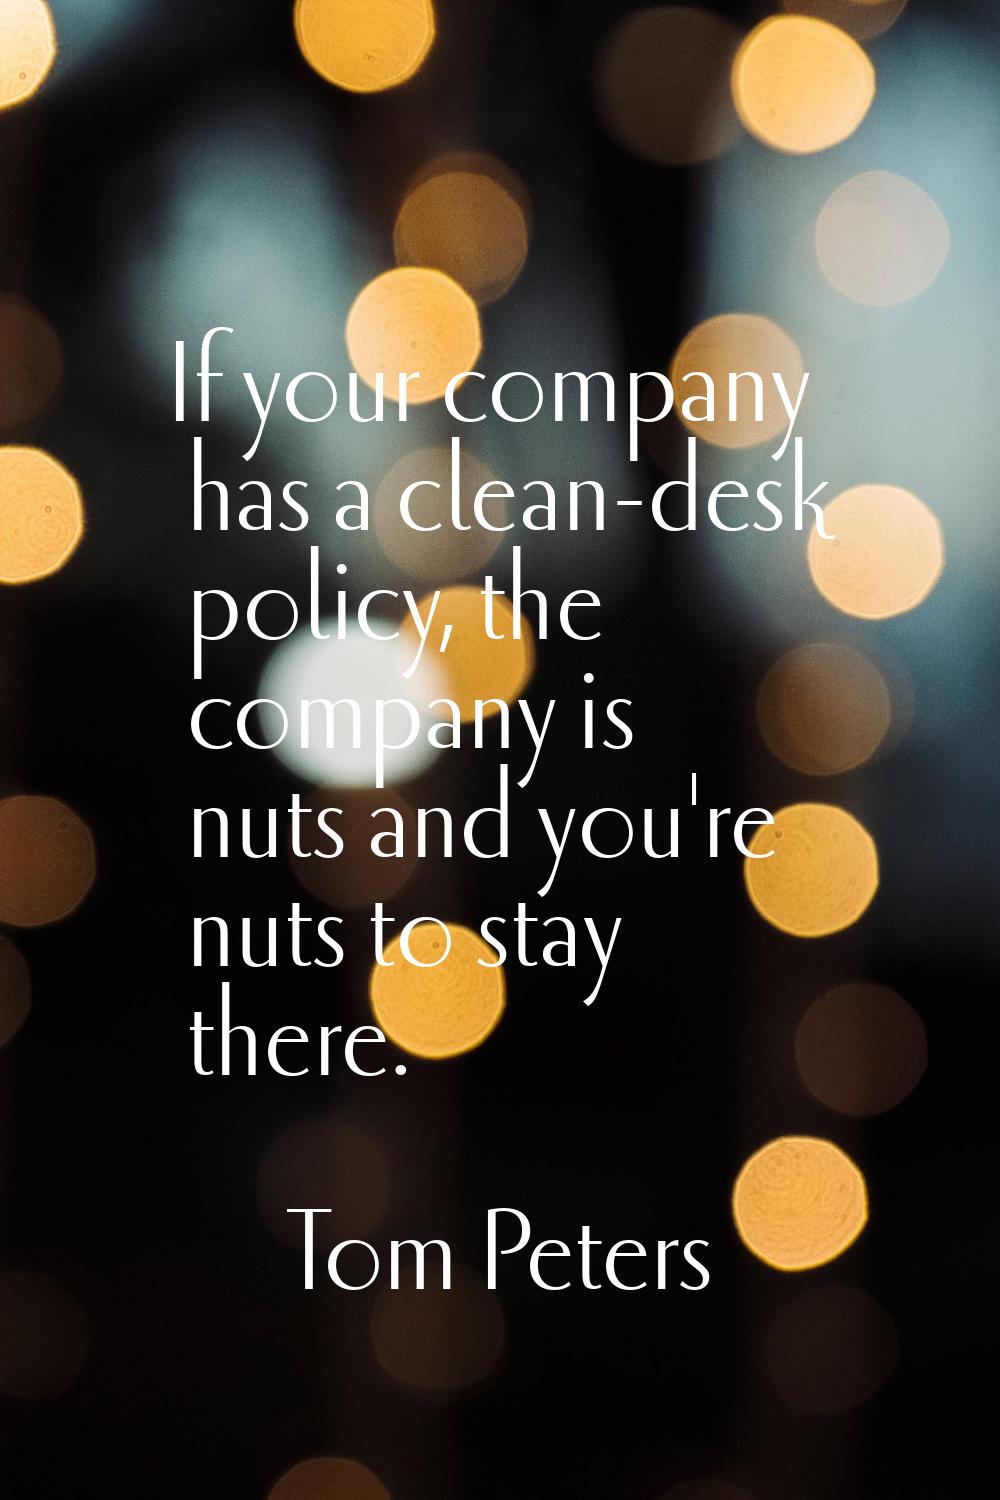 If your company has a clean-desk policy, the company is nuts and you're nuts to stay there.